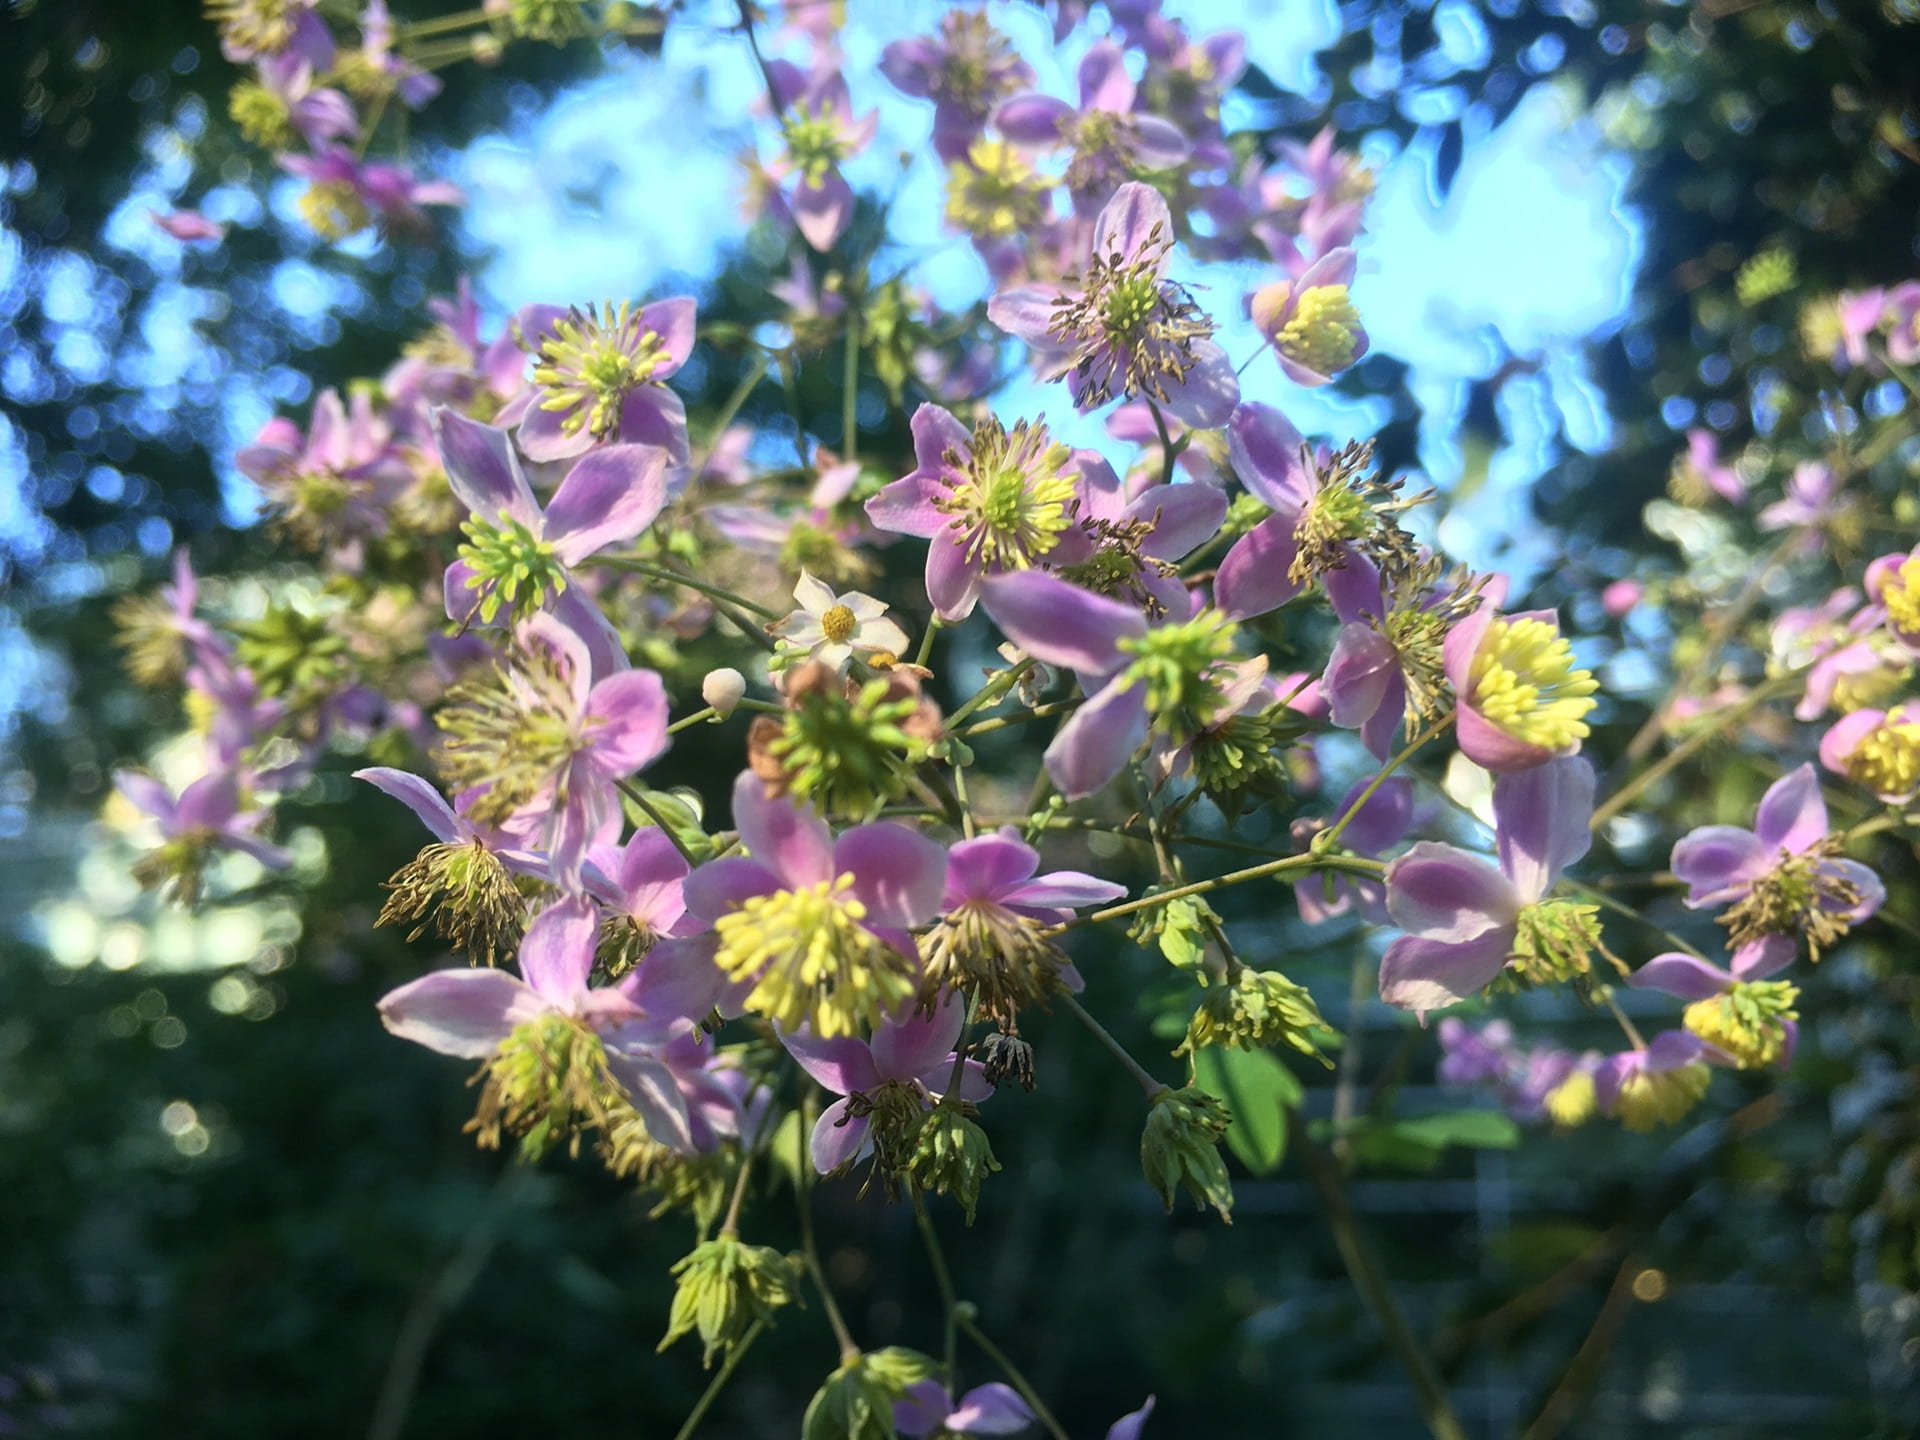 The small flowers of Thalictrum rochebruneanum create a purple cloud along the Main Path.